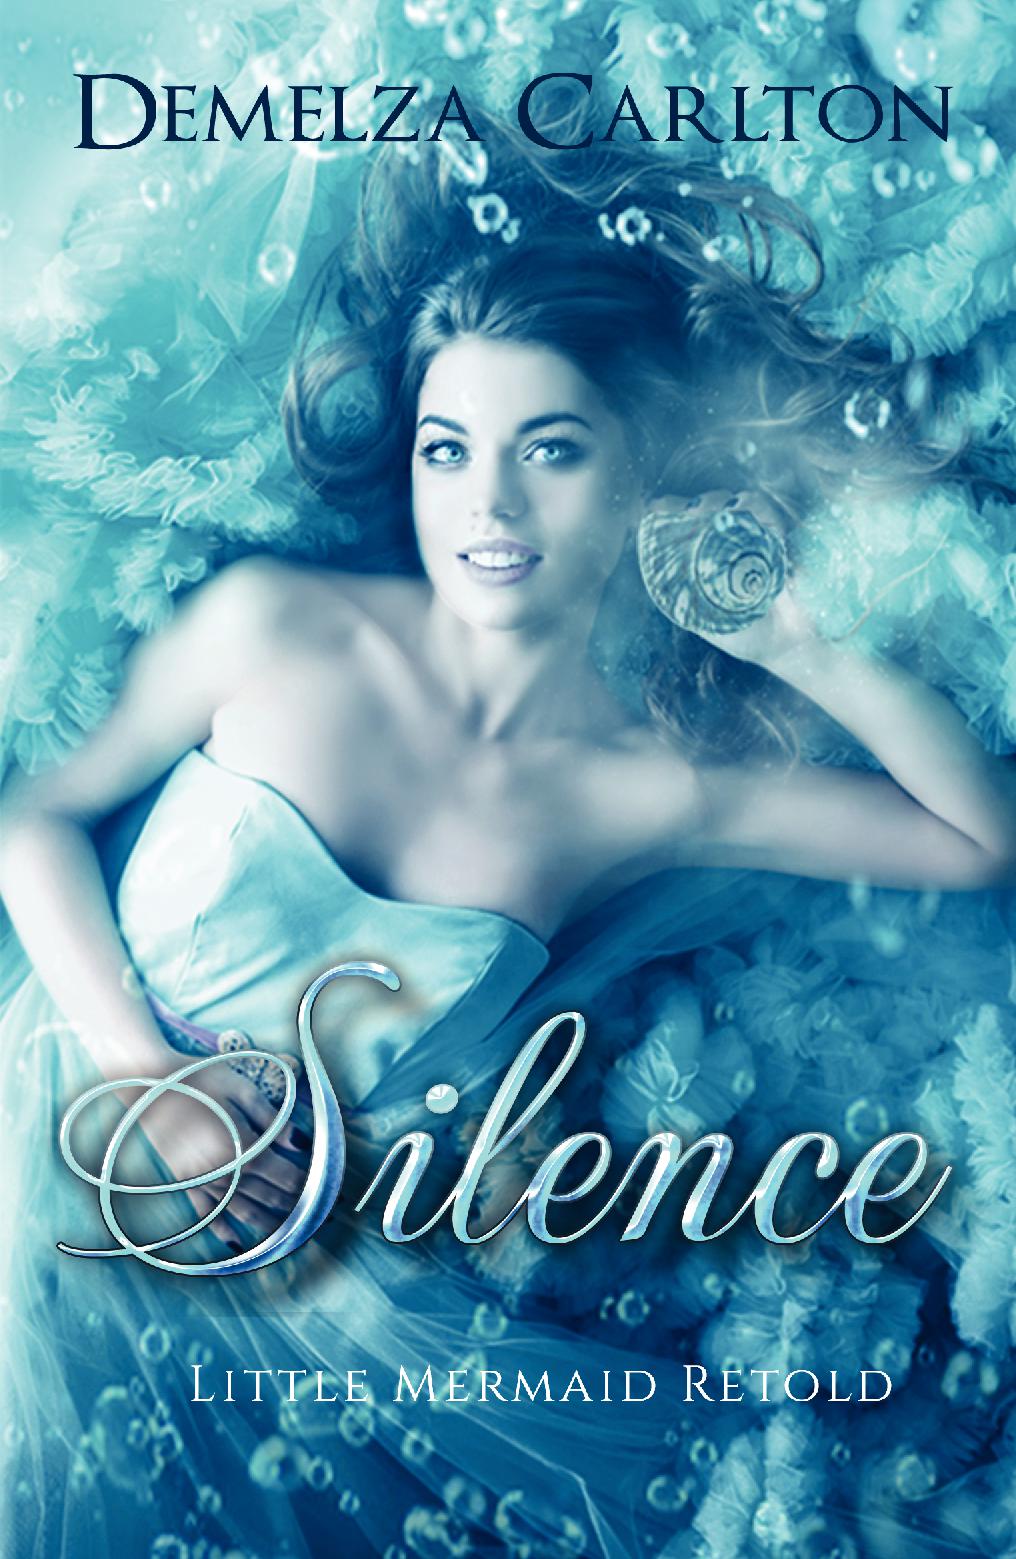 Silence: Little Mermaid Retold (Book 5 in the Romance a Medieval Fairytale series) PAPERBACK